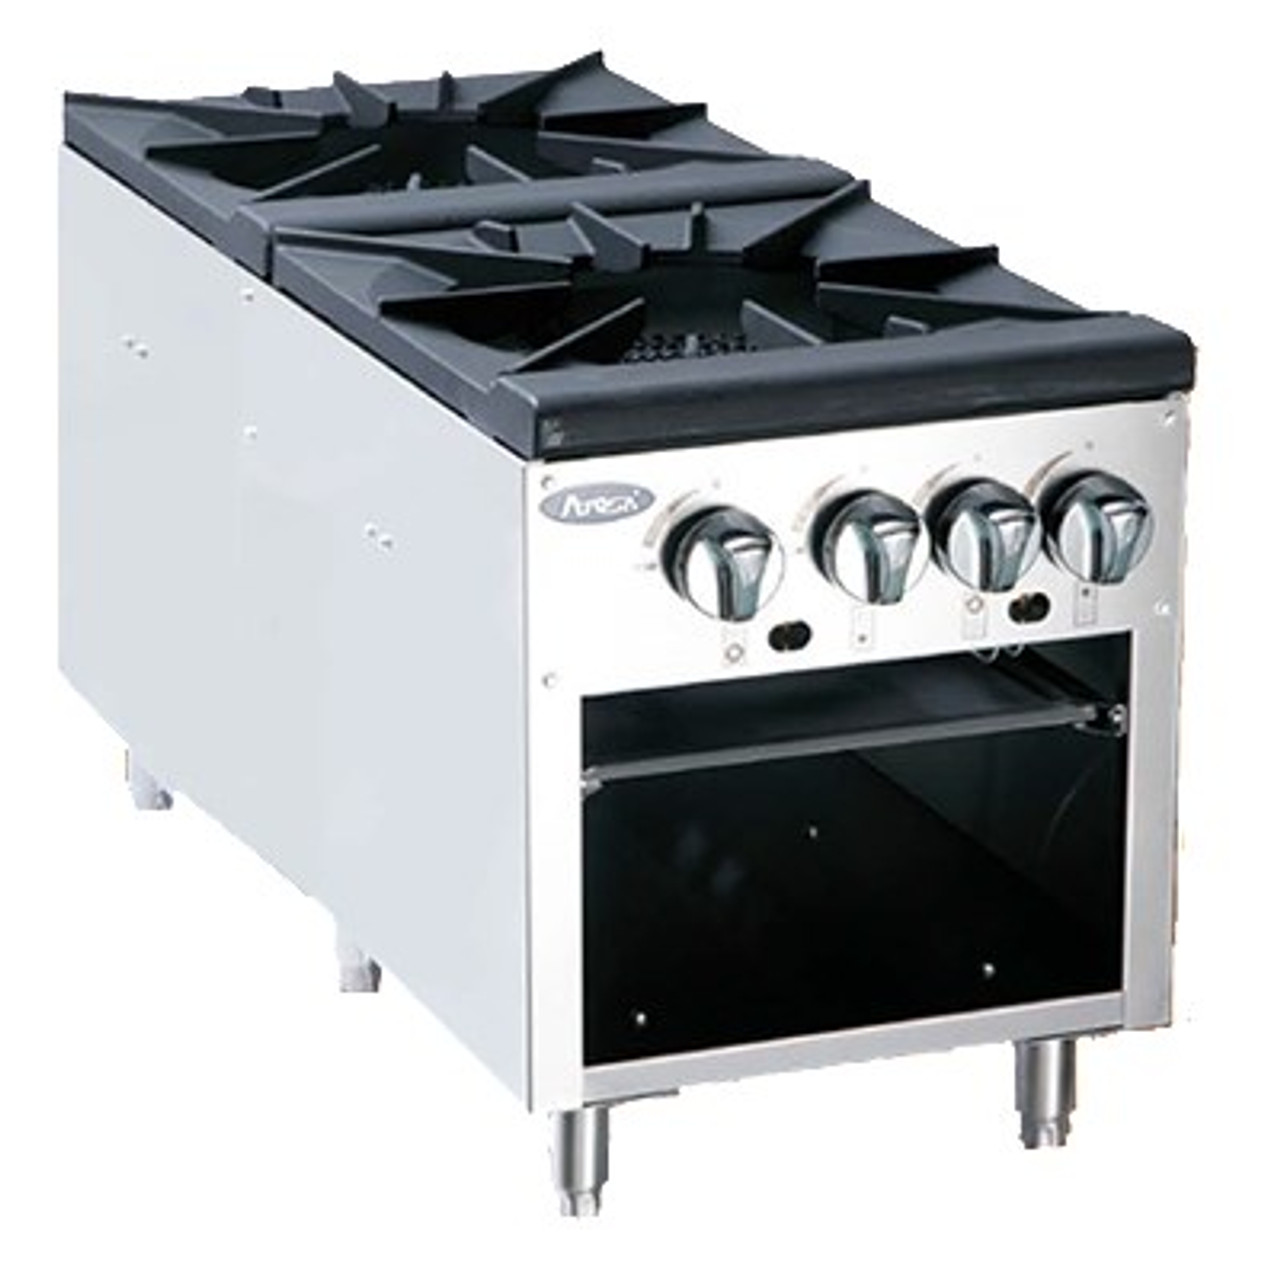 Iron Range IRSP-1B Commercial Natural Gas Stock Pot With One 3 Ring Burner,  80,000 BTU, ETL Listed - Walmart.com